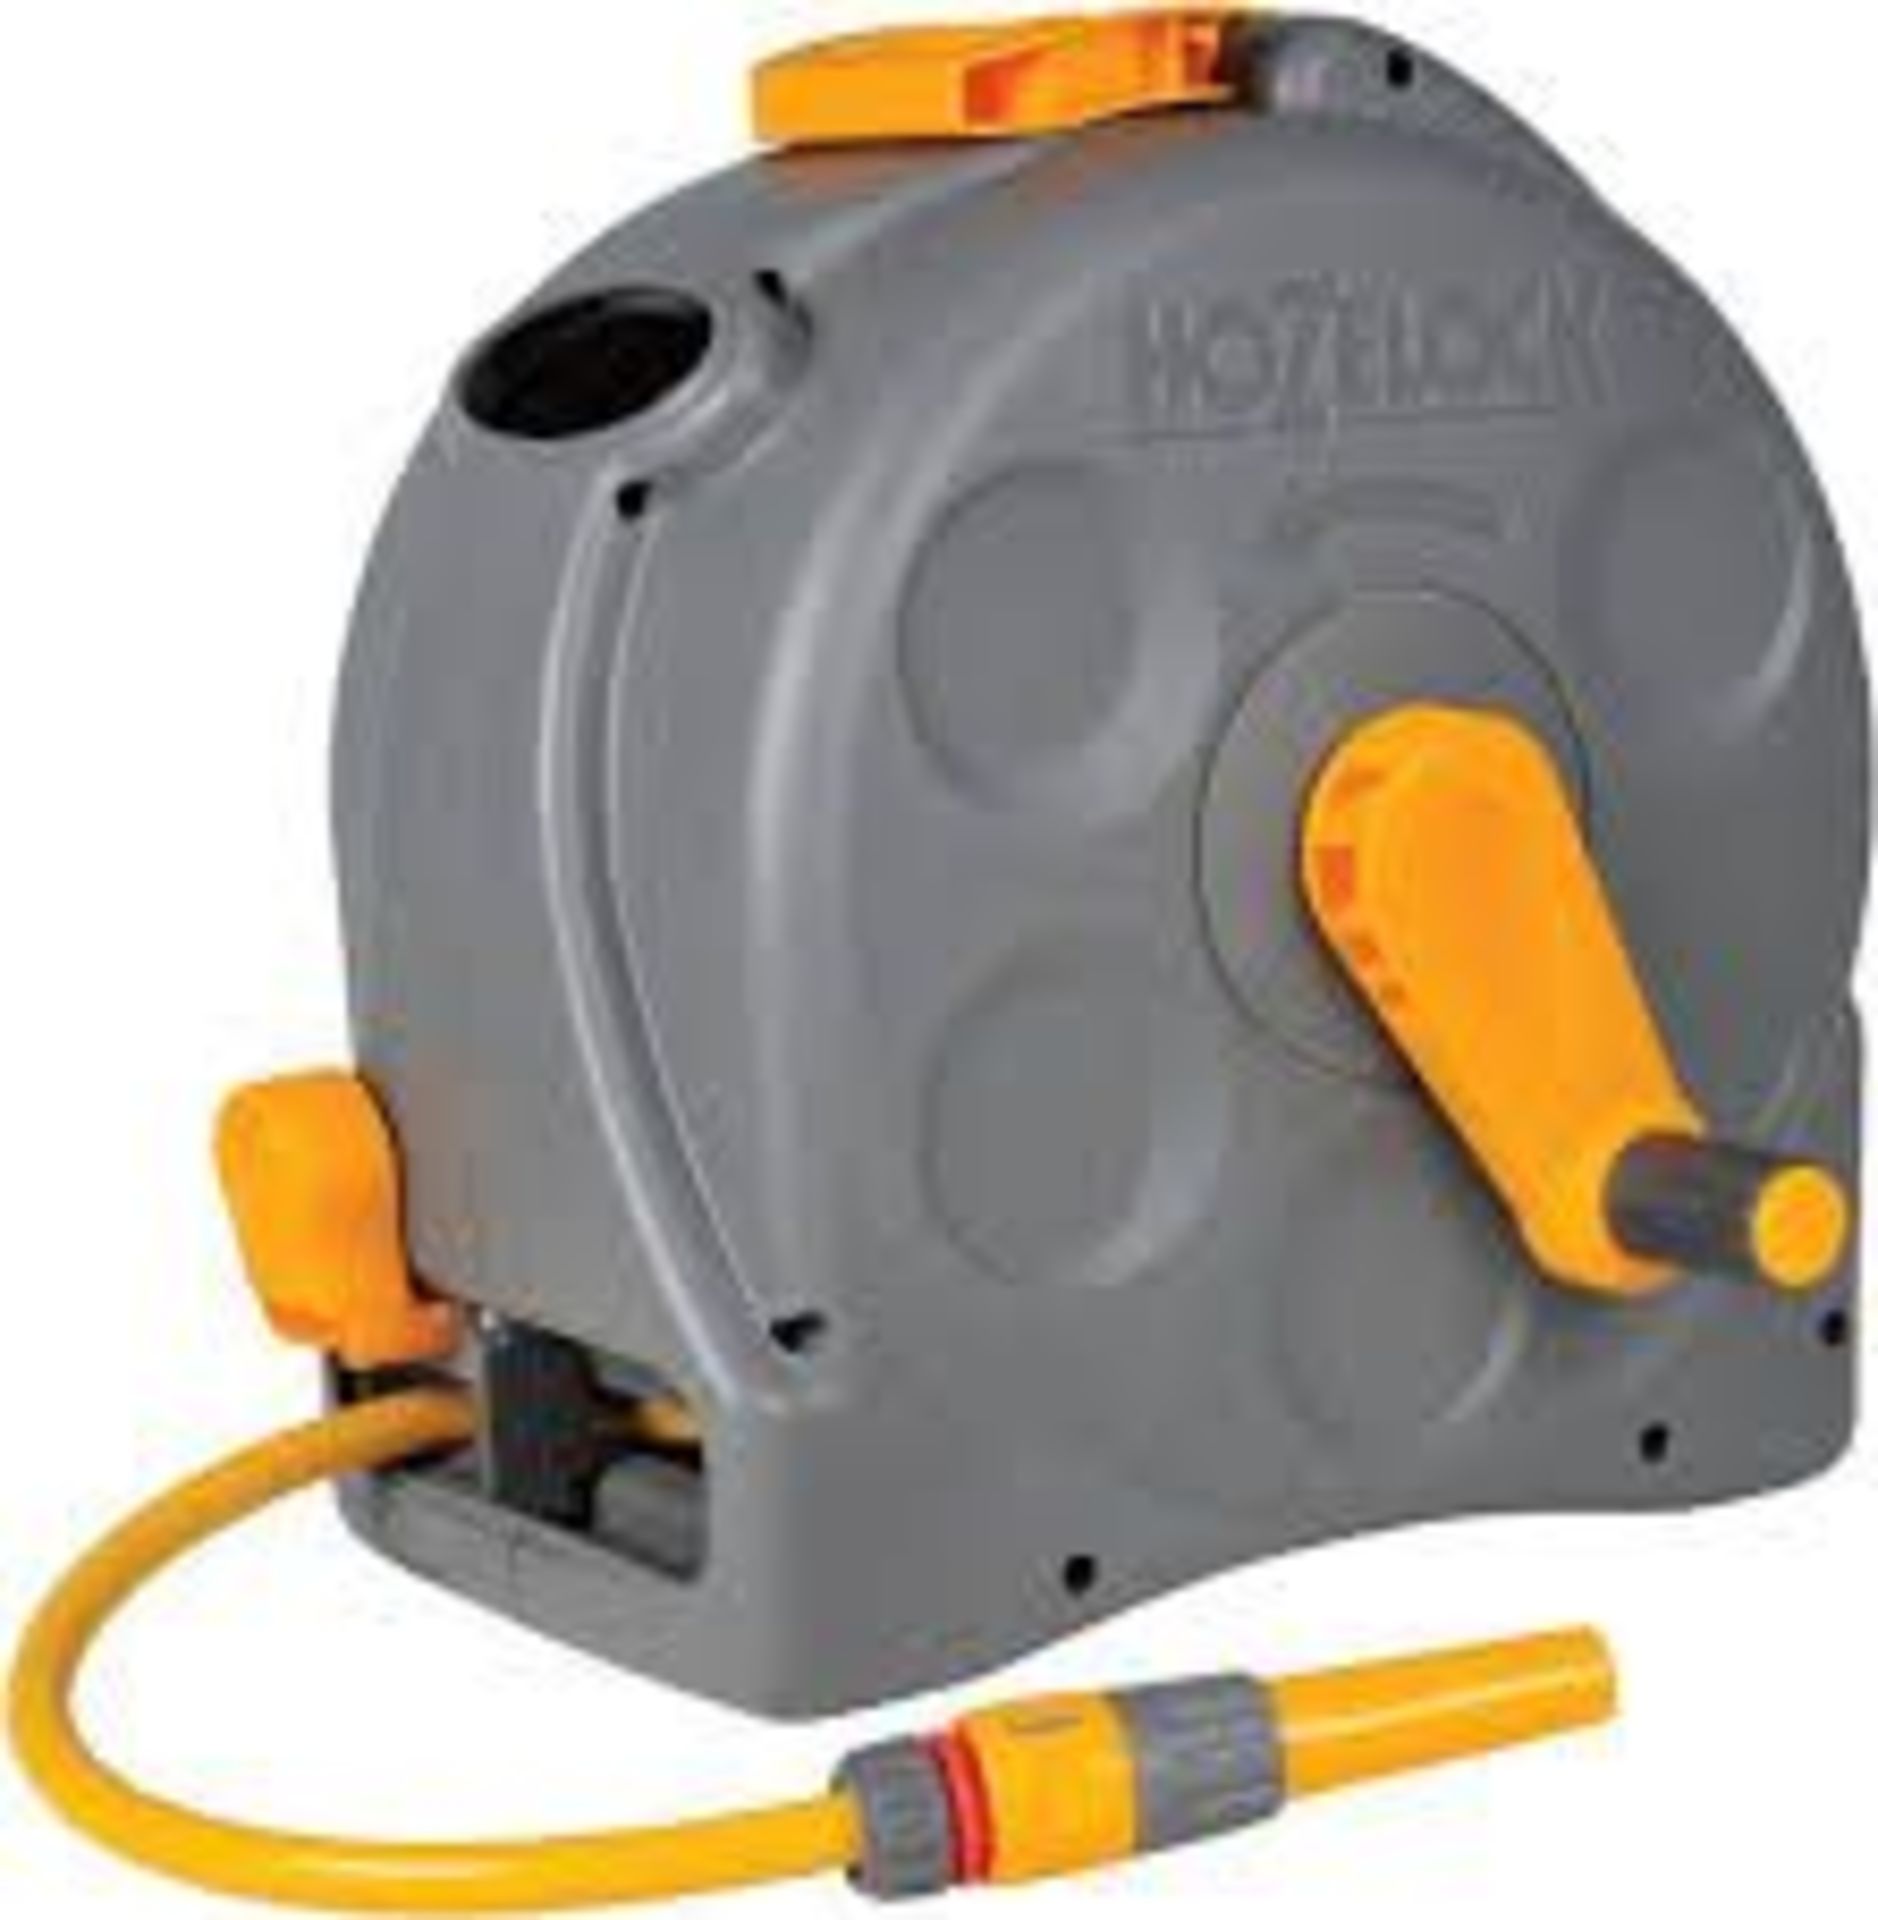 HOZELOCK - 2-in-1 Compact Hose Reel 25m. - R14.6